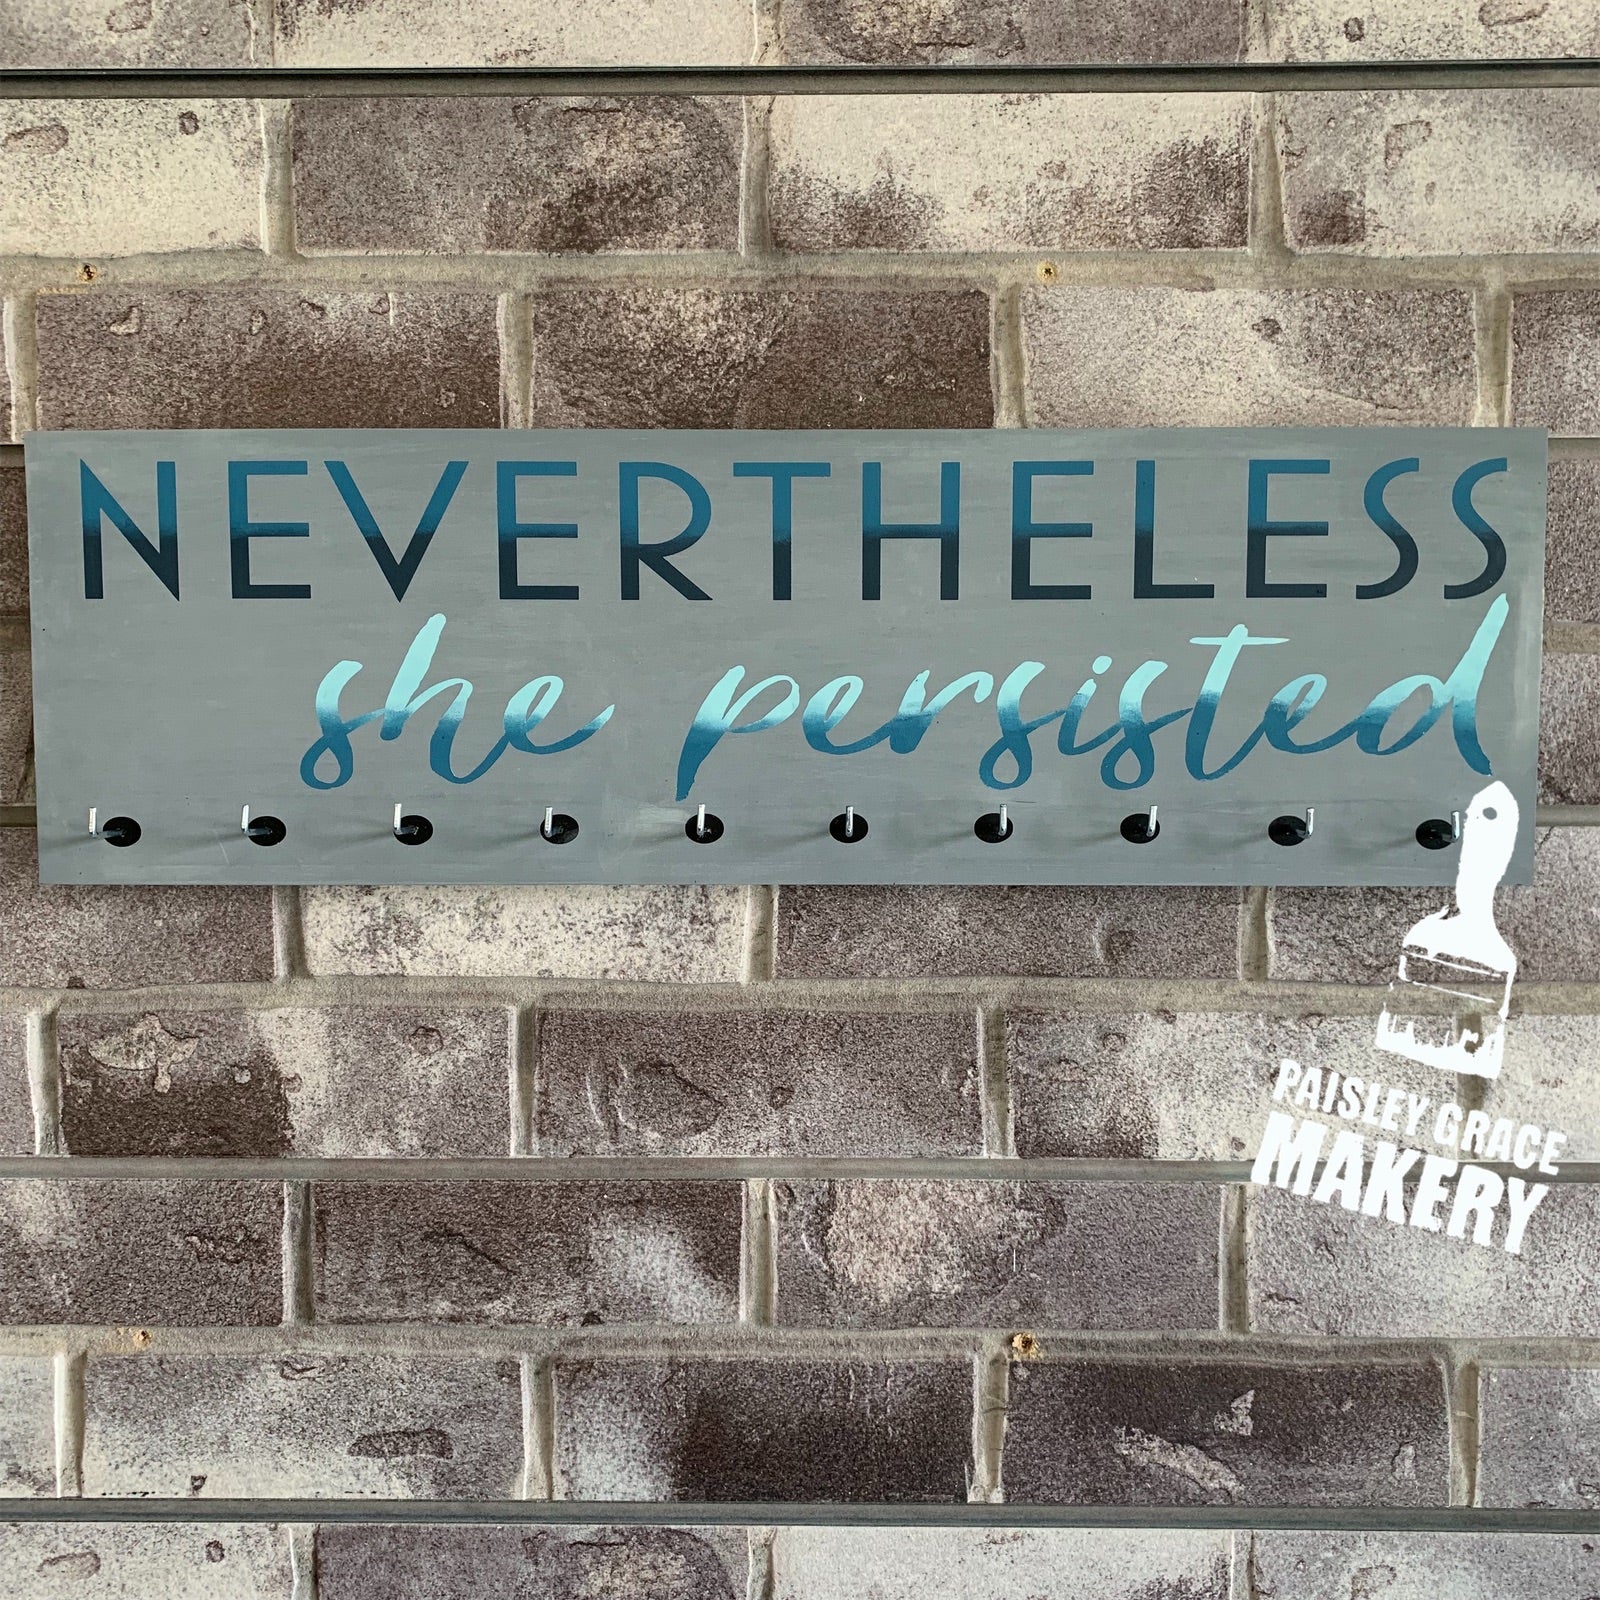 NEVERTHELESS SHE PERSISTED.: Medal Holder - Paisley Grace Makery